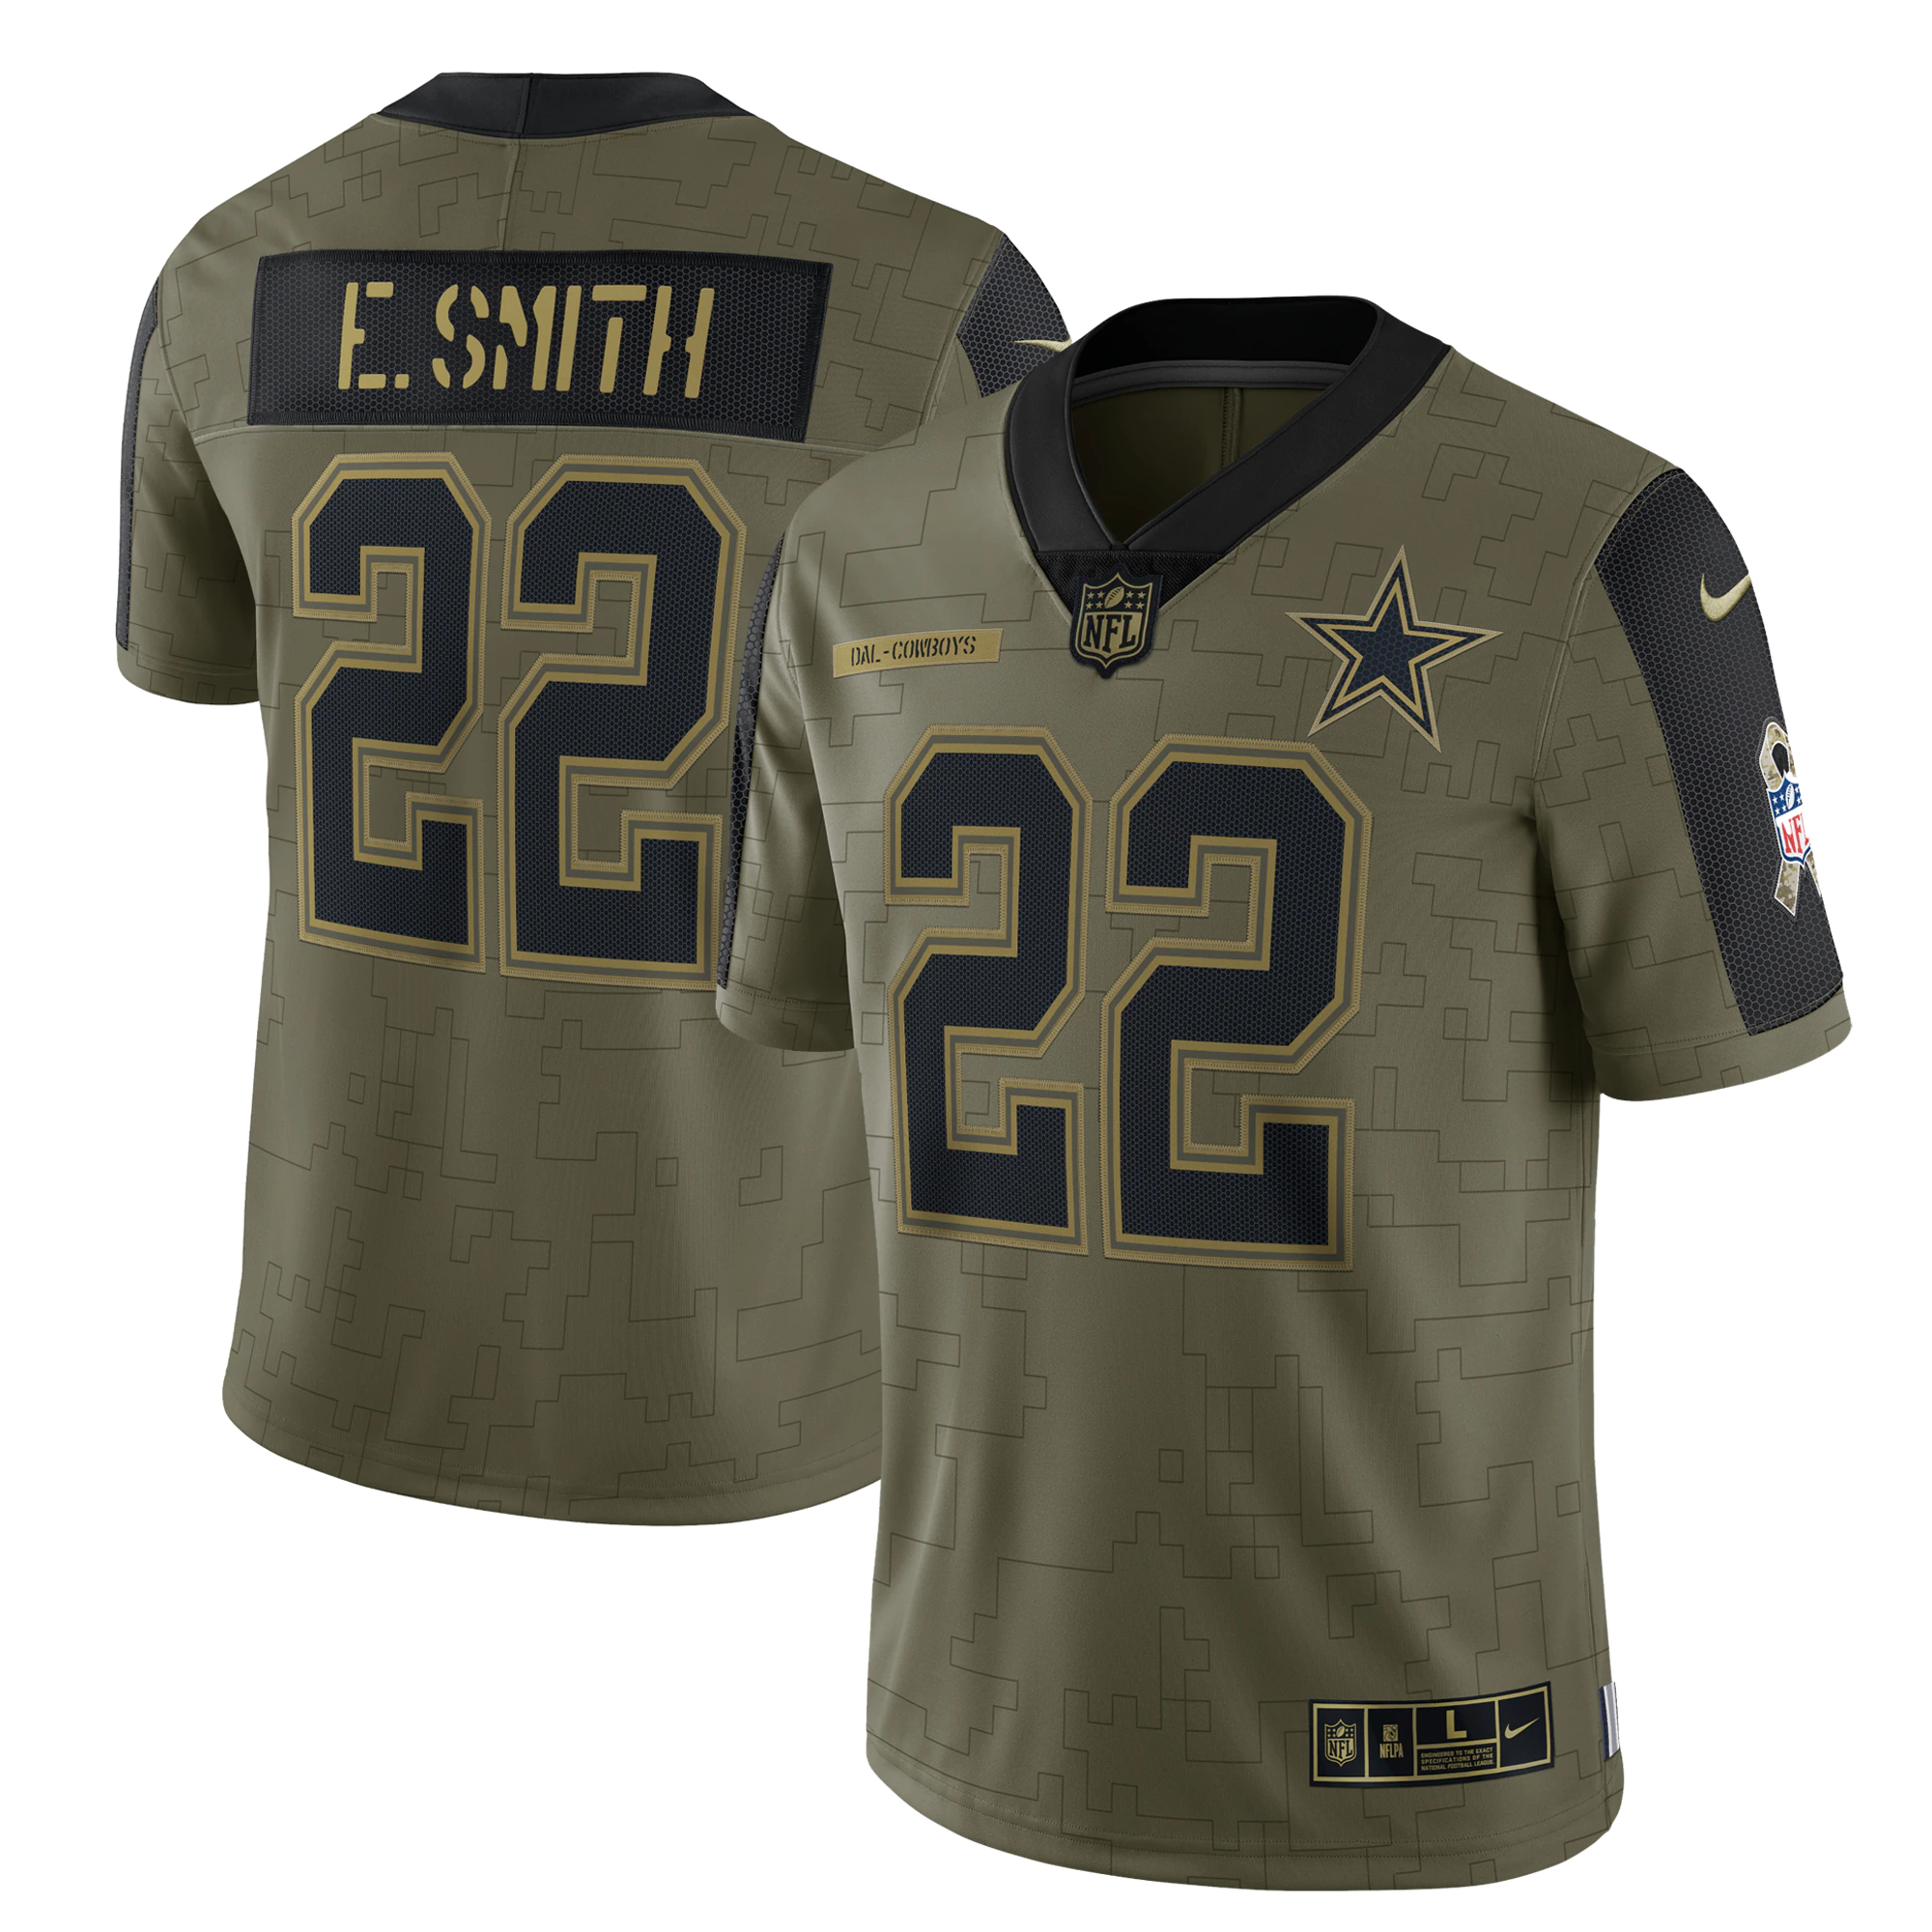 Men's Dallas Cowboys Emmitt Smith Nike Olive 2021 Salute To Service Retired Player Limited Jersey